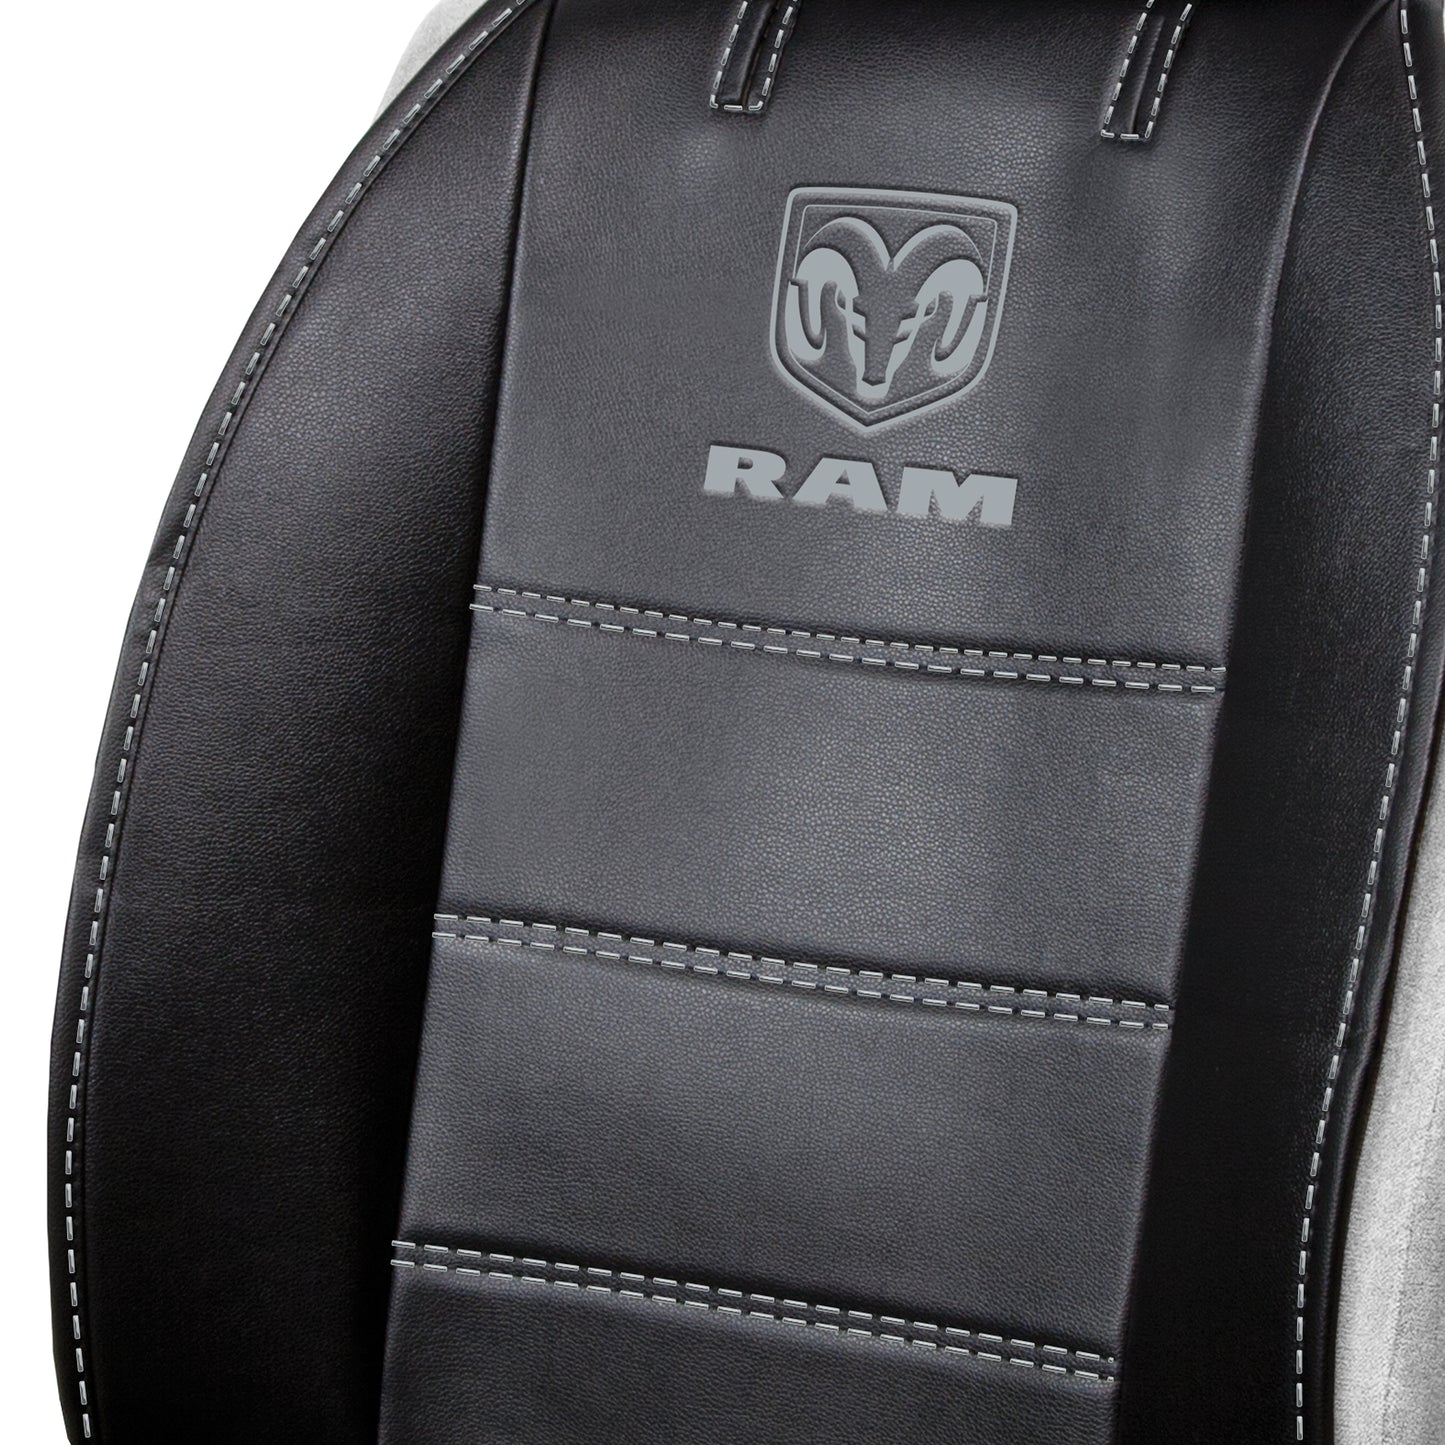 Pair of Plasticolor Premium 3 Piece Sideless Car Truck or SUV Seat Cover with RAM Logo and Cargo Pocket Compatible with RAM - Yupbizauto